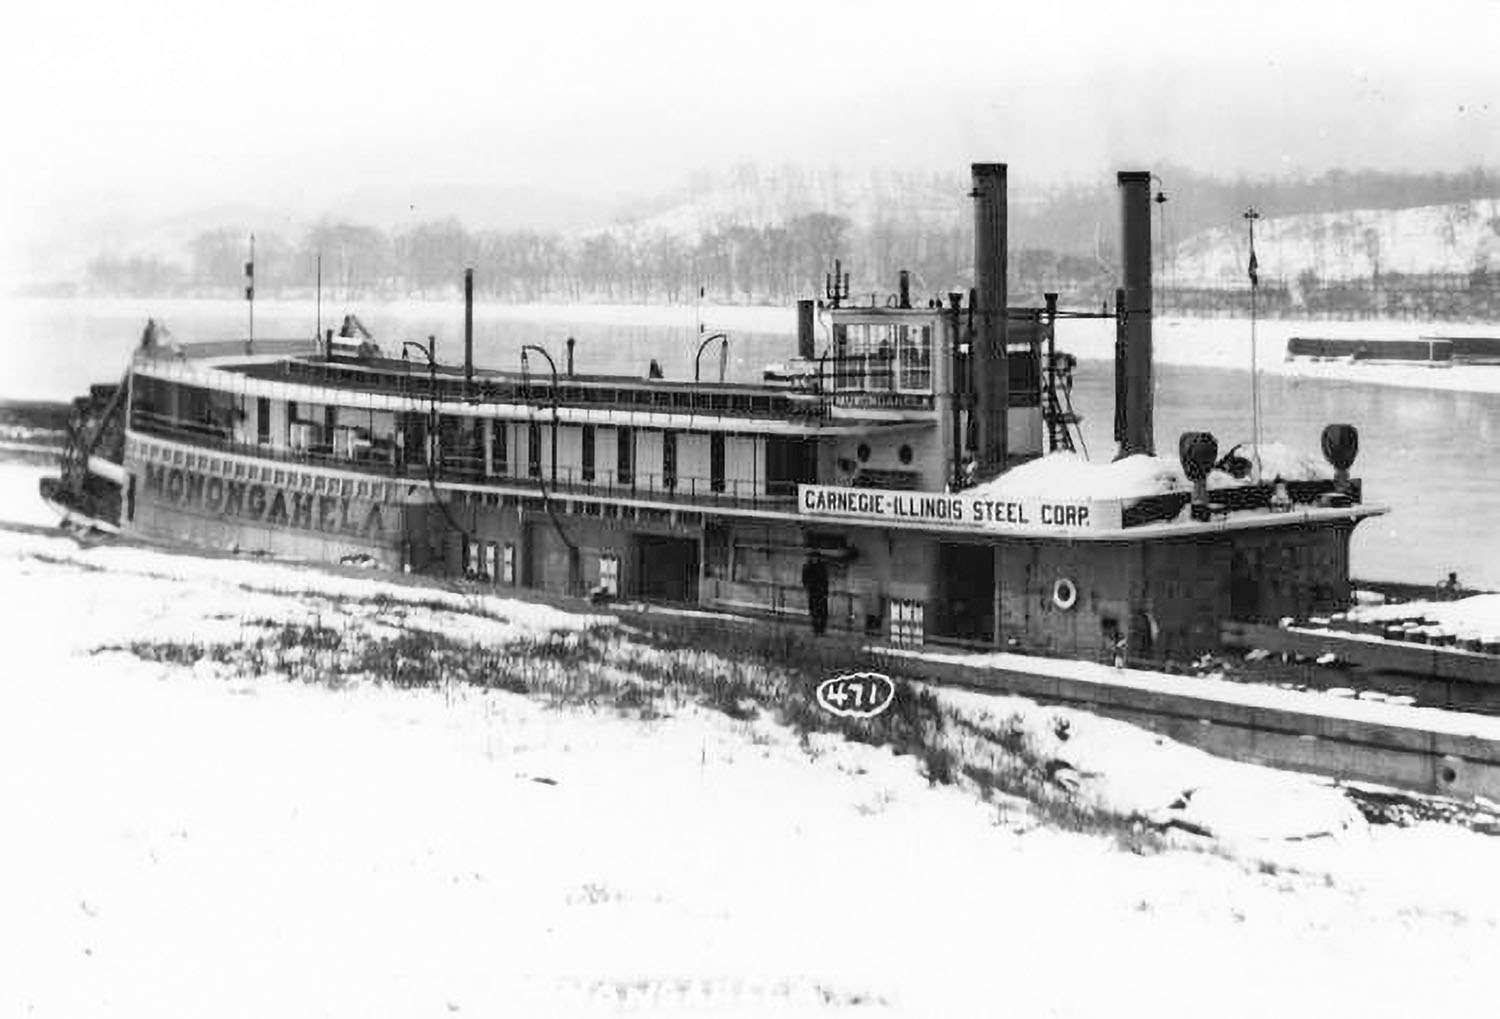 The Monongahela as built and in service for Carnegie Illinois Steel. (David Smith collection)